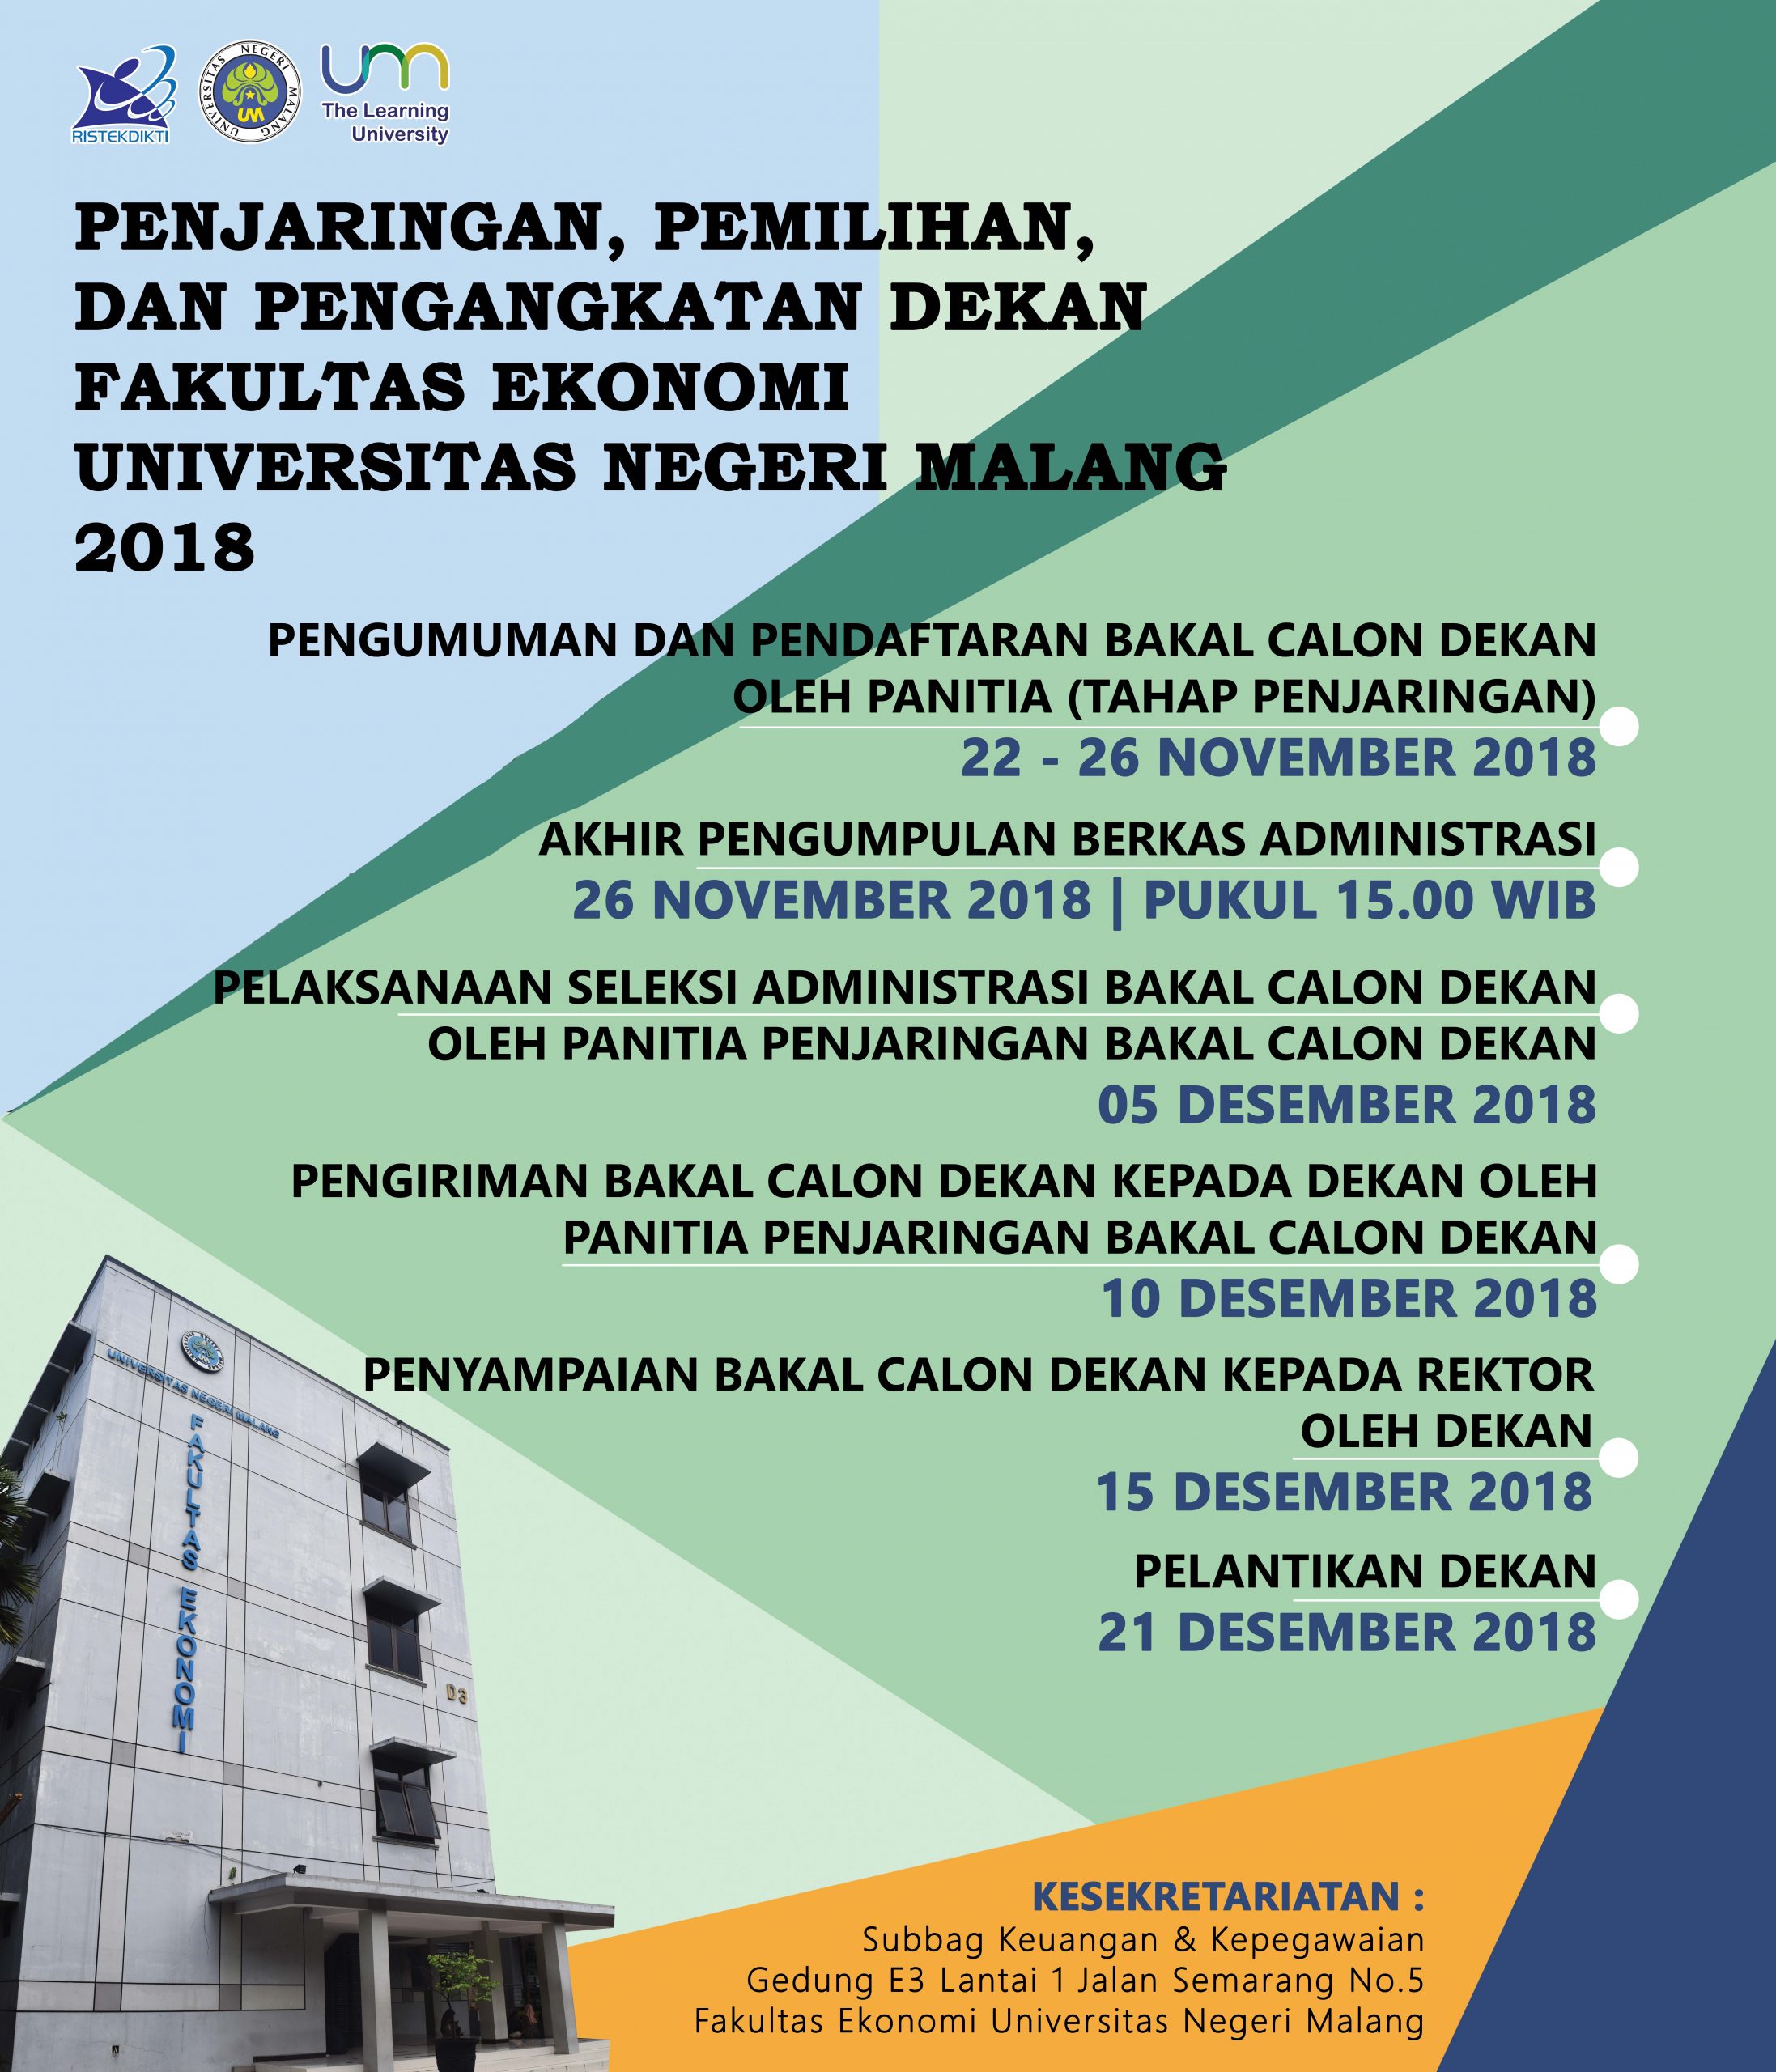 REGISTRATION OF PROSPECTIVE DEKAN FACULTY OF ECONOMICS MALANG STATE UNIVERSITY 2018-2022 PERIOD